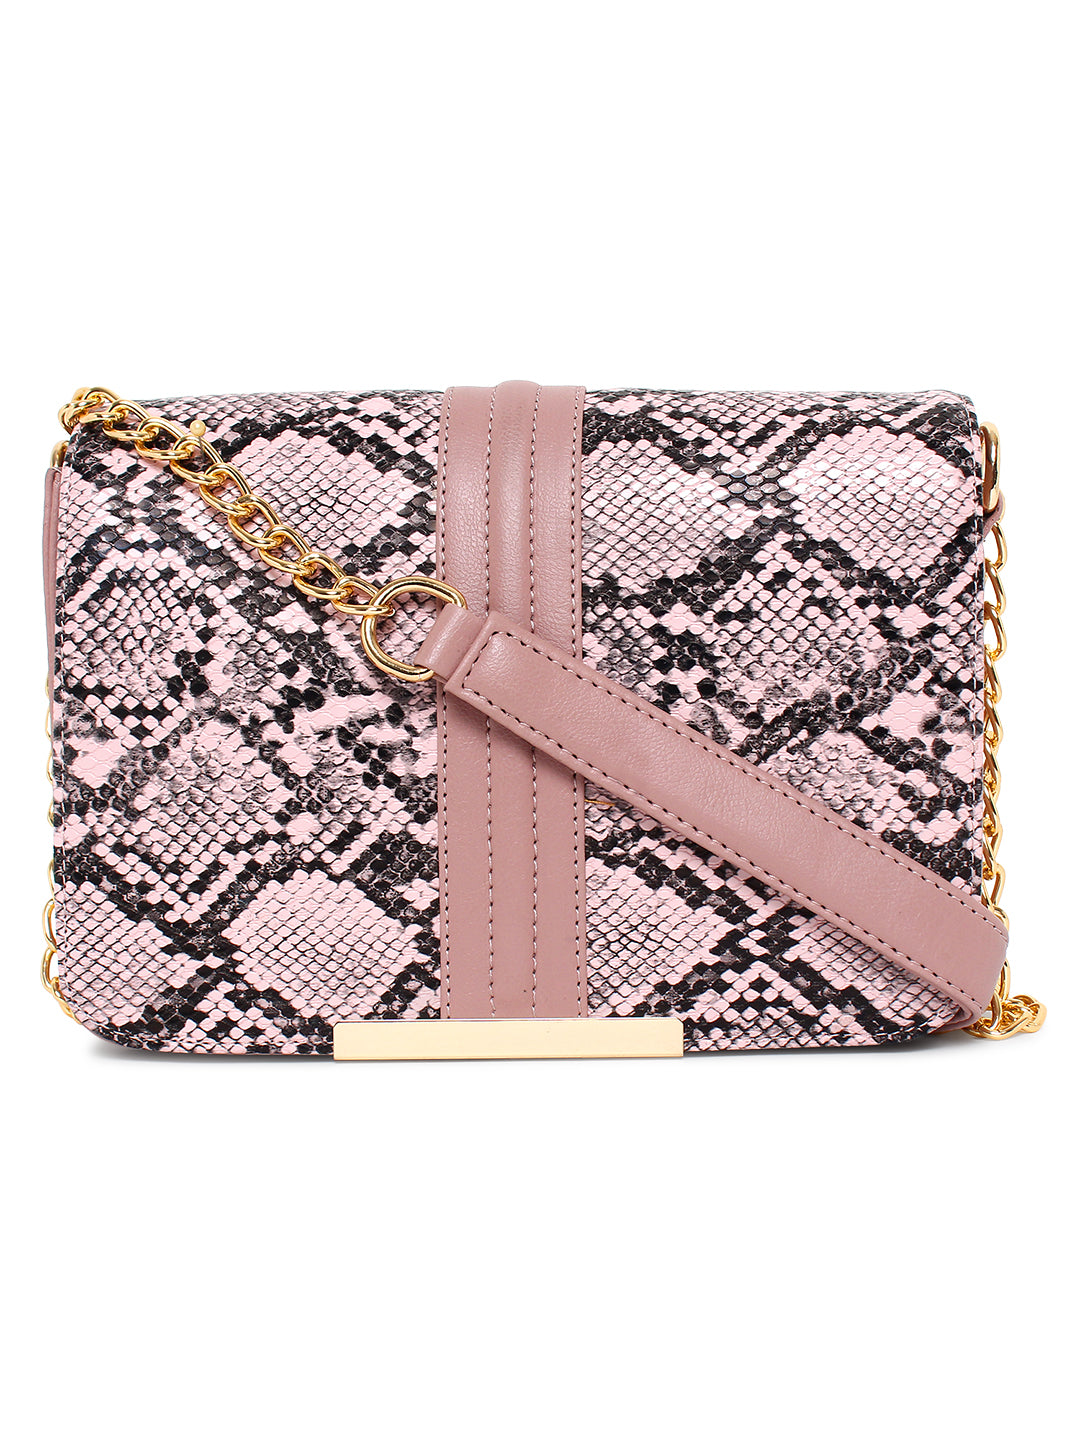 Women's Pink Sling Bag with Snake Print